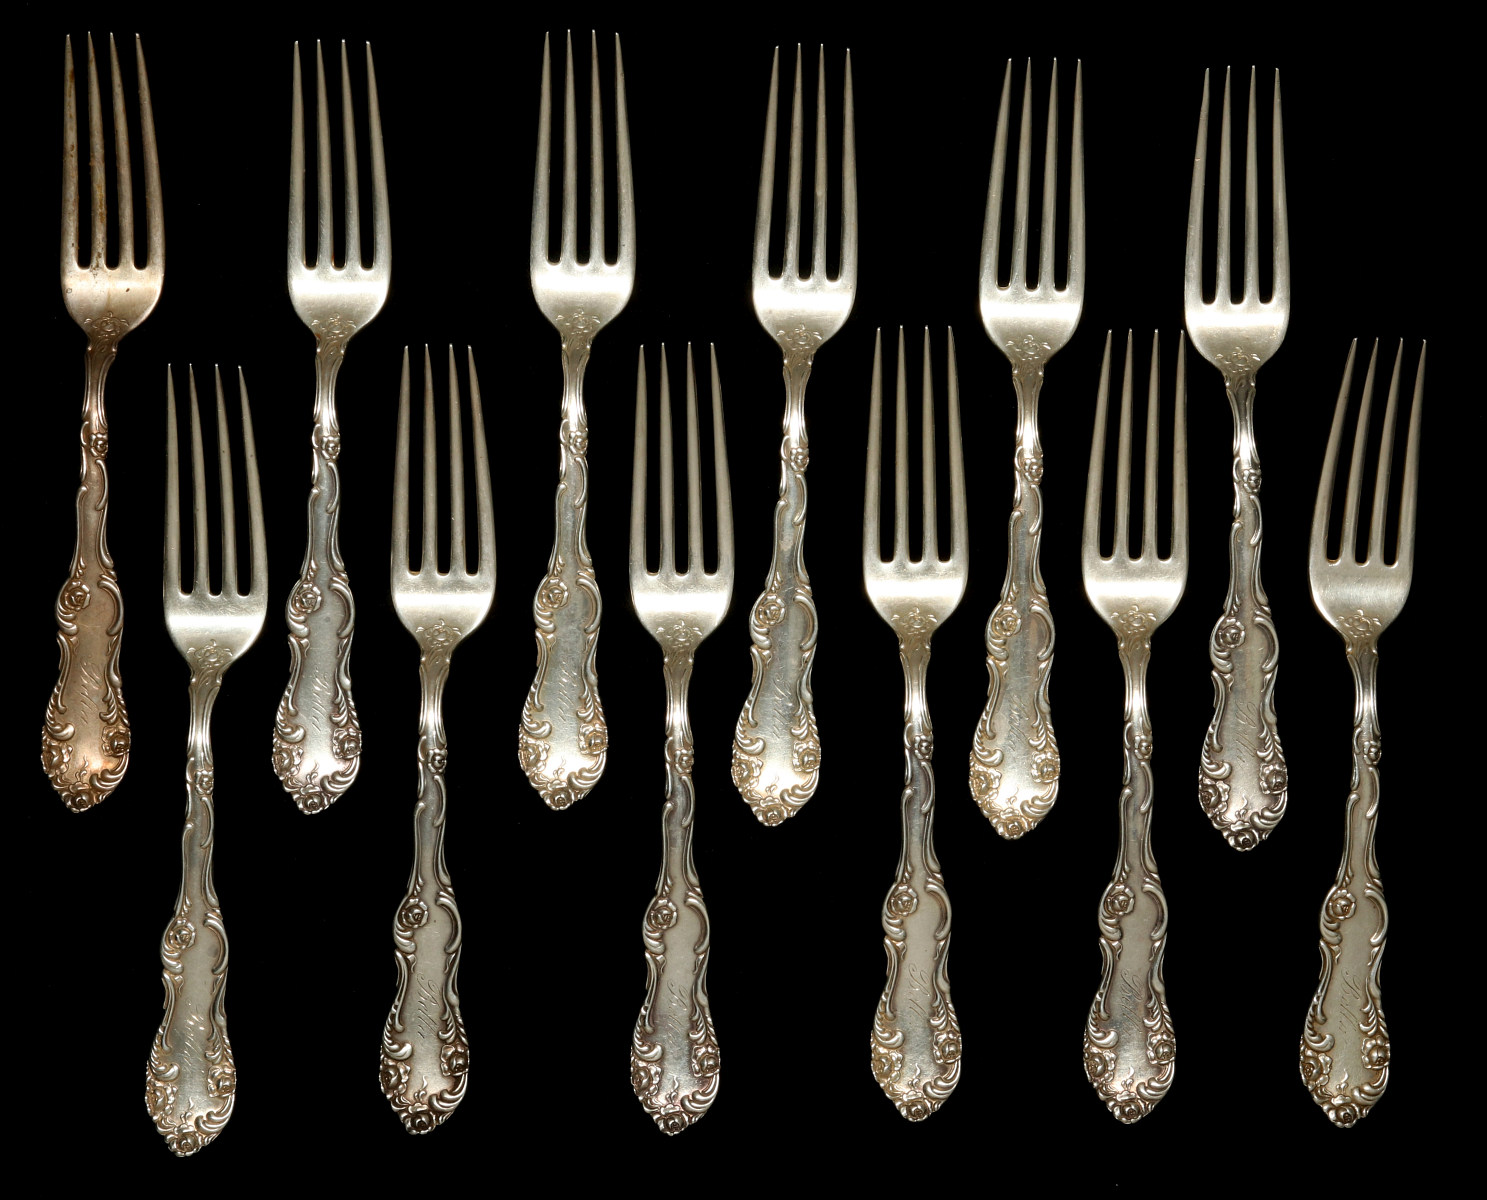 TOWLE 'OLD ENGLISH' STERLING SILVER FORKS